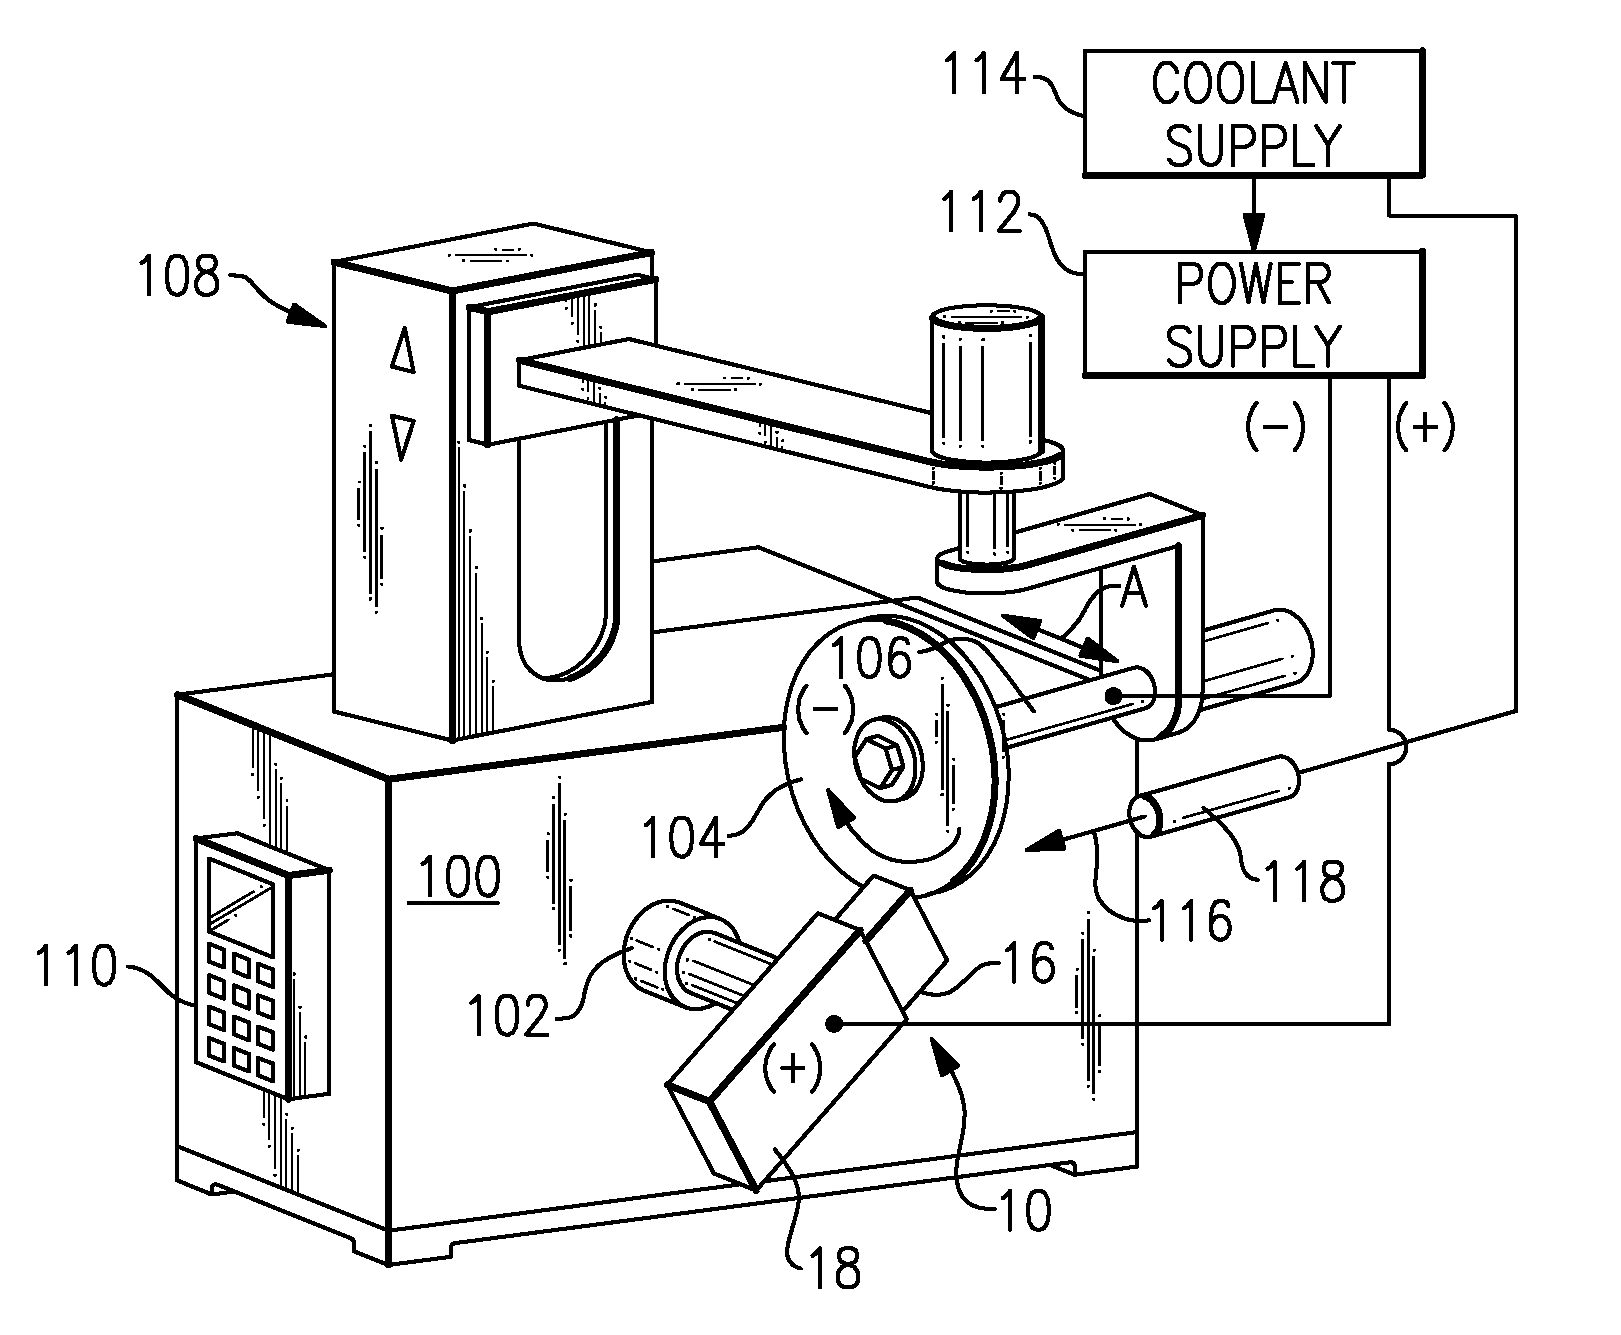 Apparatus and method for hybrid machining a workpiece